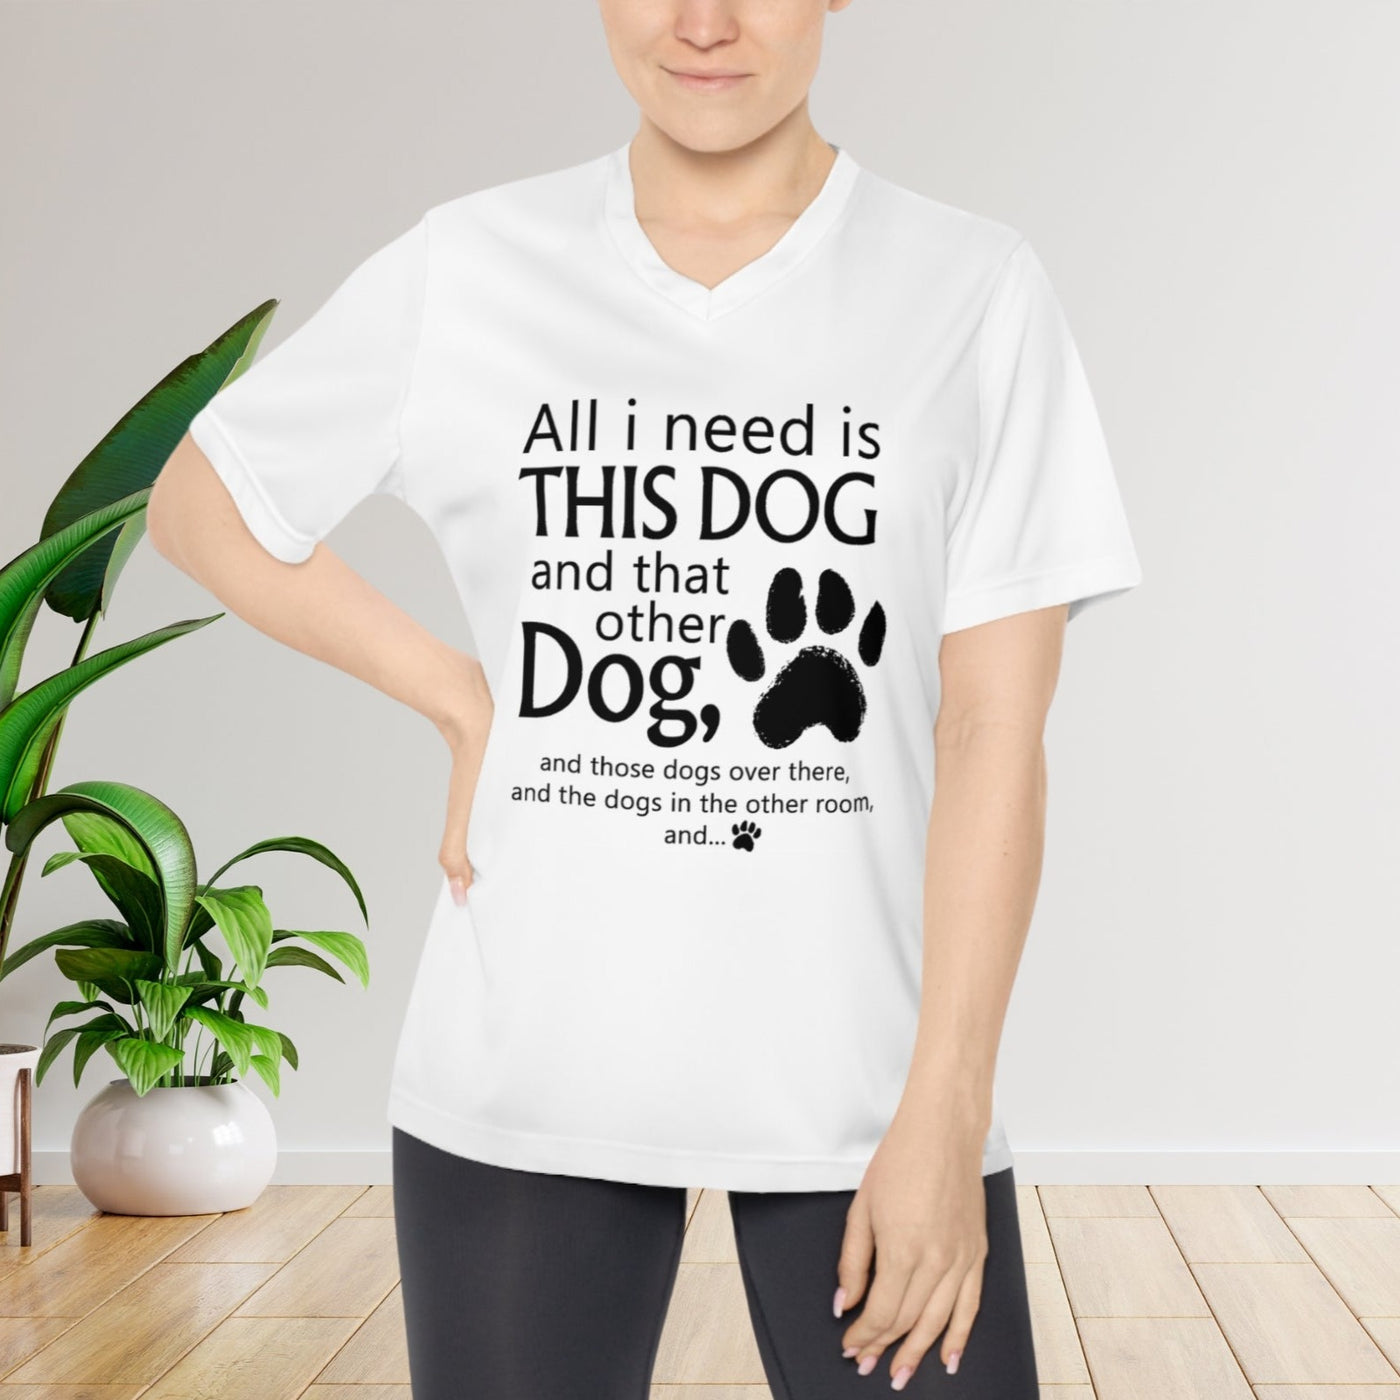 All I need is... This Dog And That Other Dog V-Neck